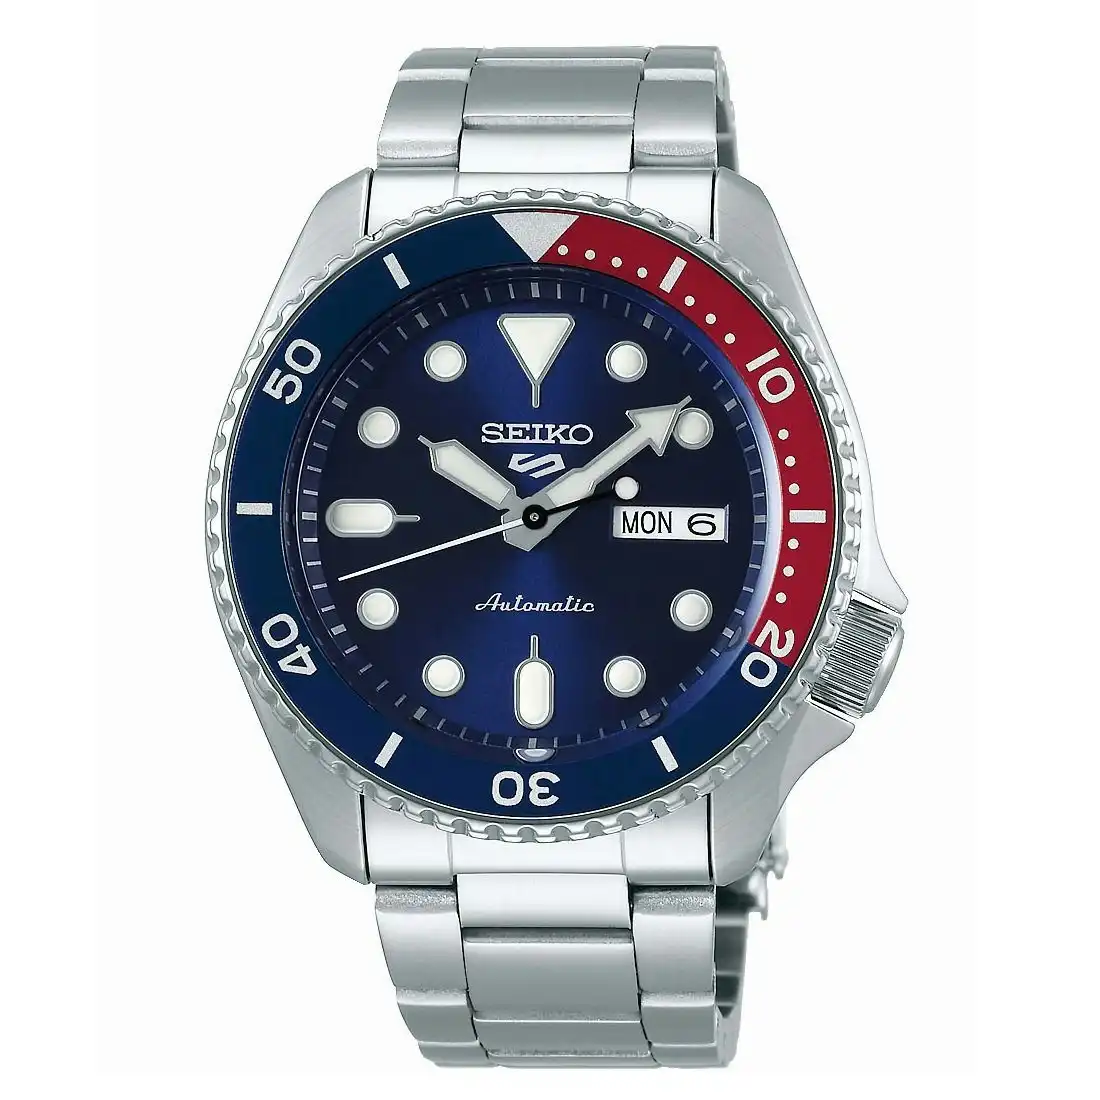 Seiko Automatic Red, Blue & Silver Watch SRPD53K